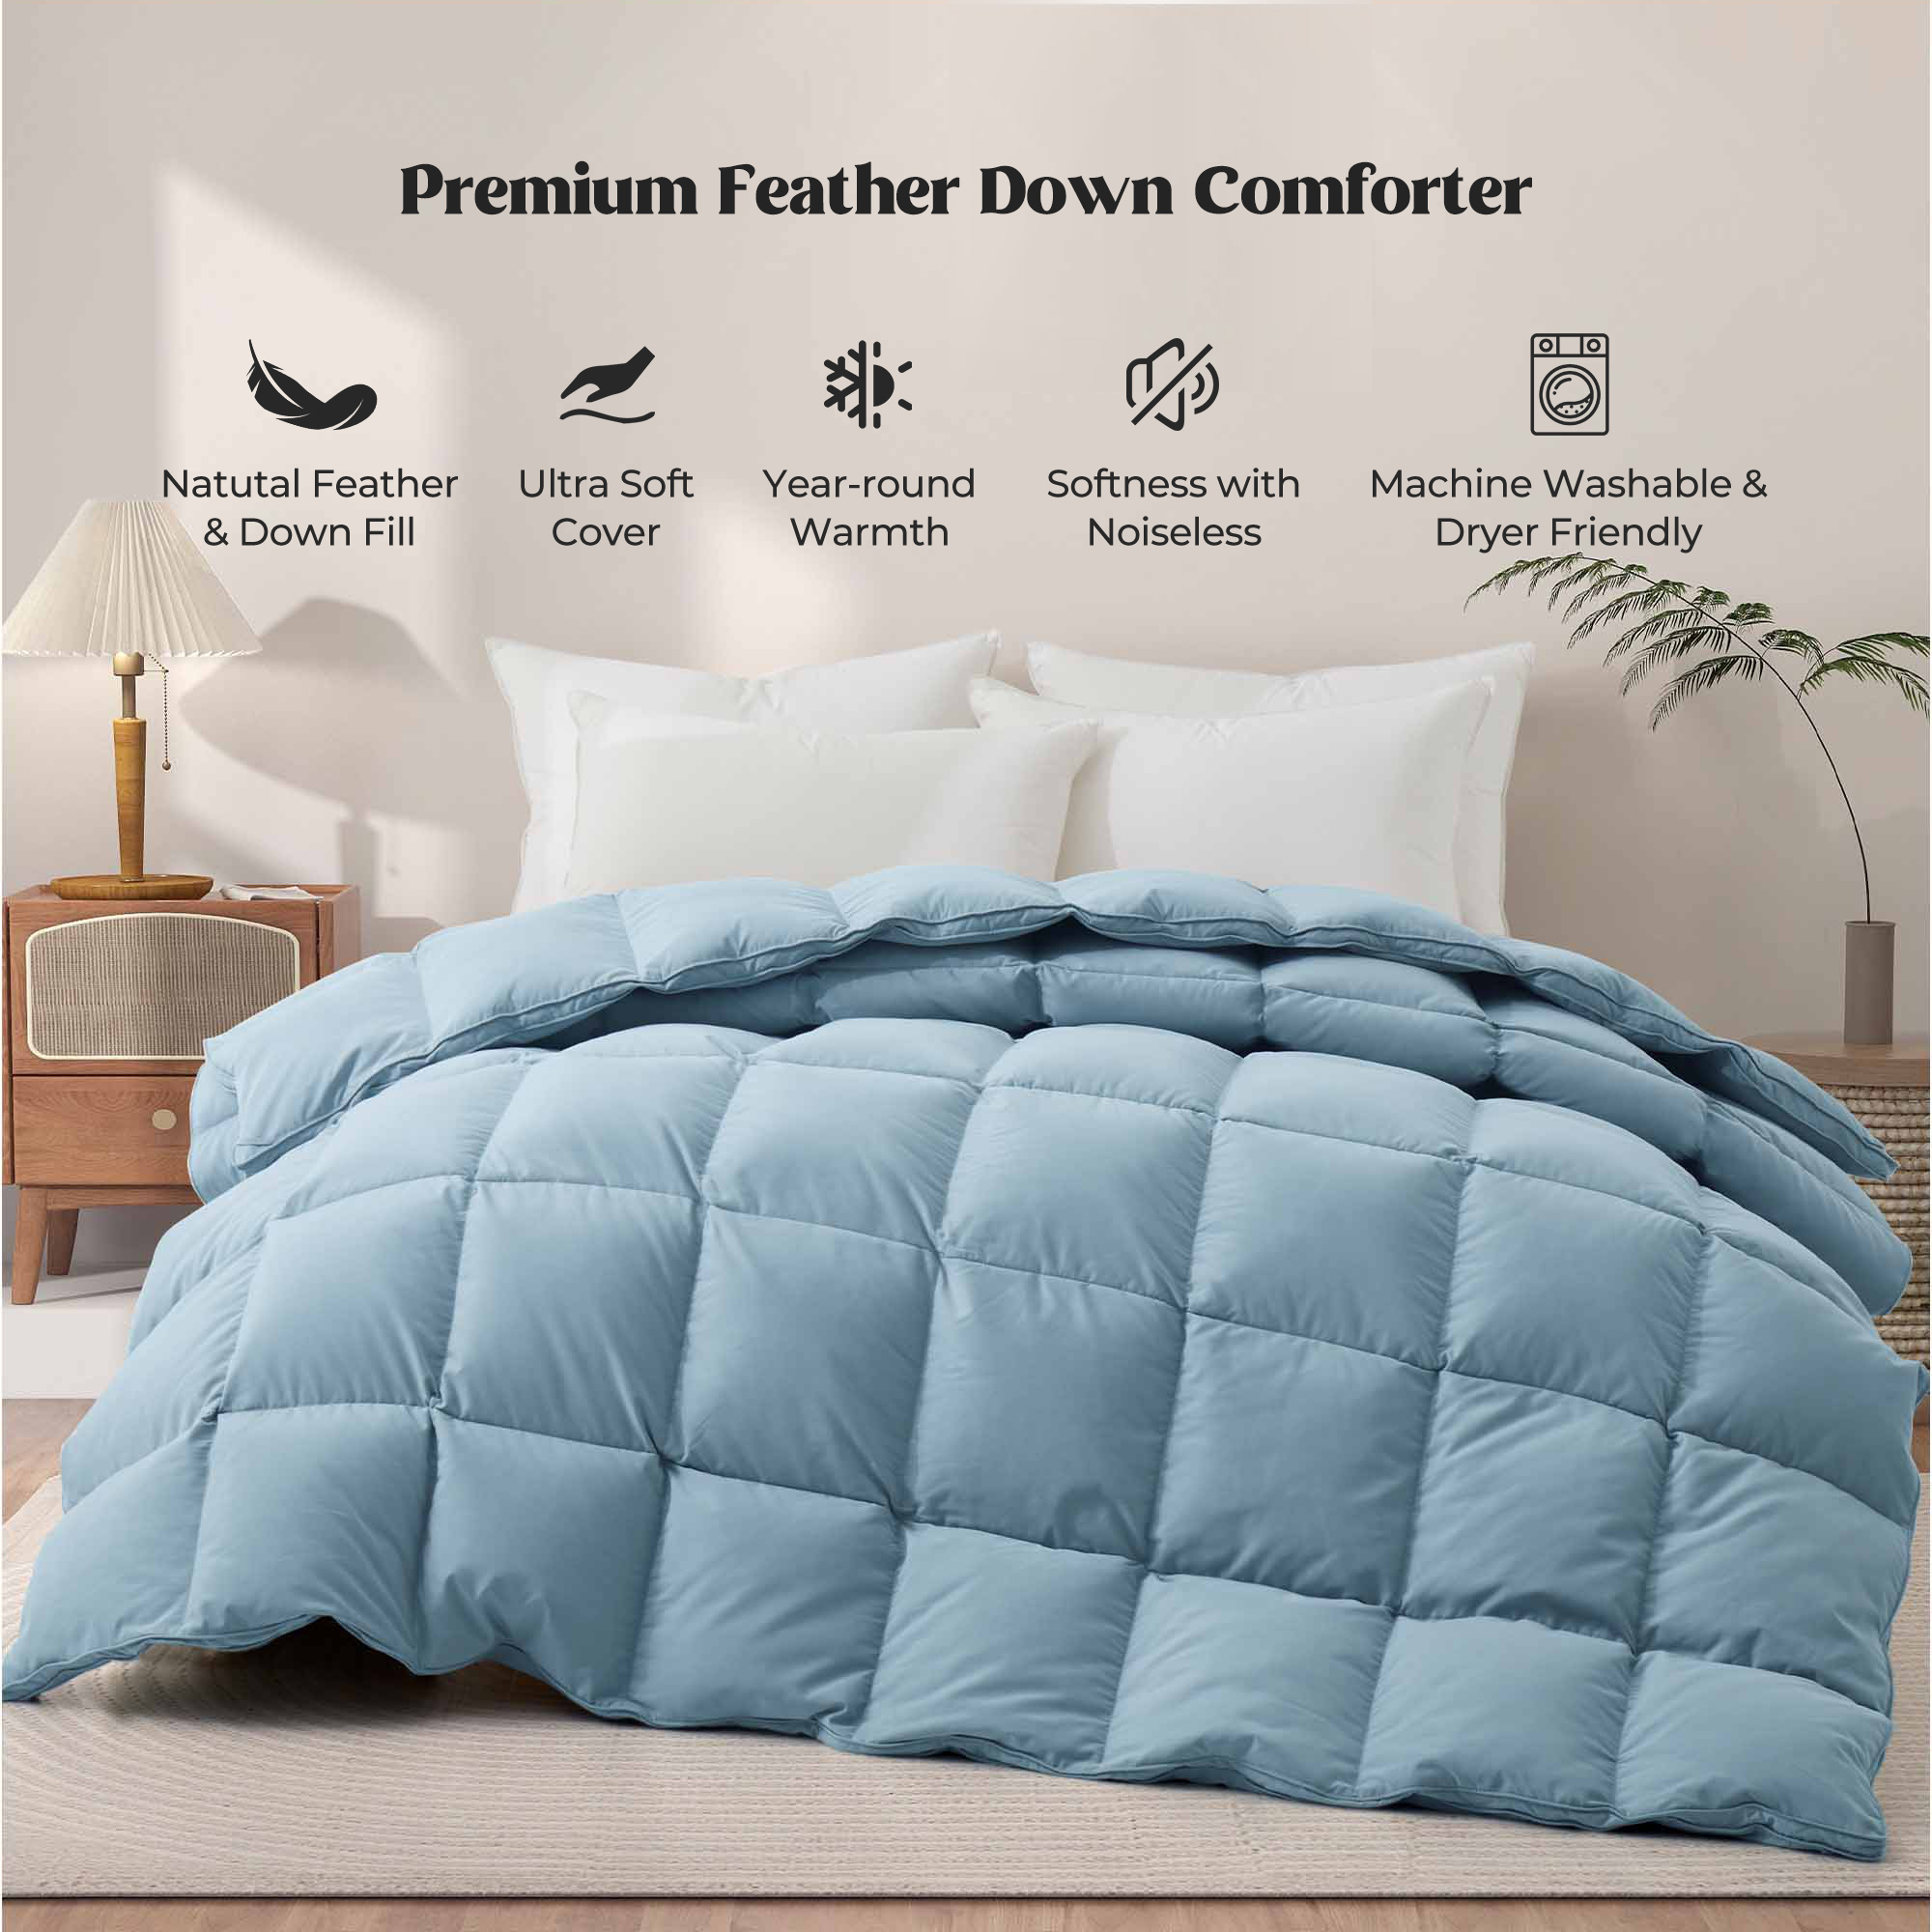 Medium Weight Goose Feather And Down Comforter - Steel Blue, California King